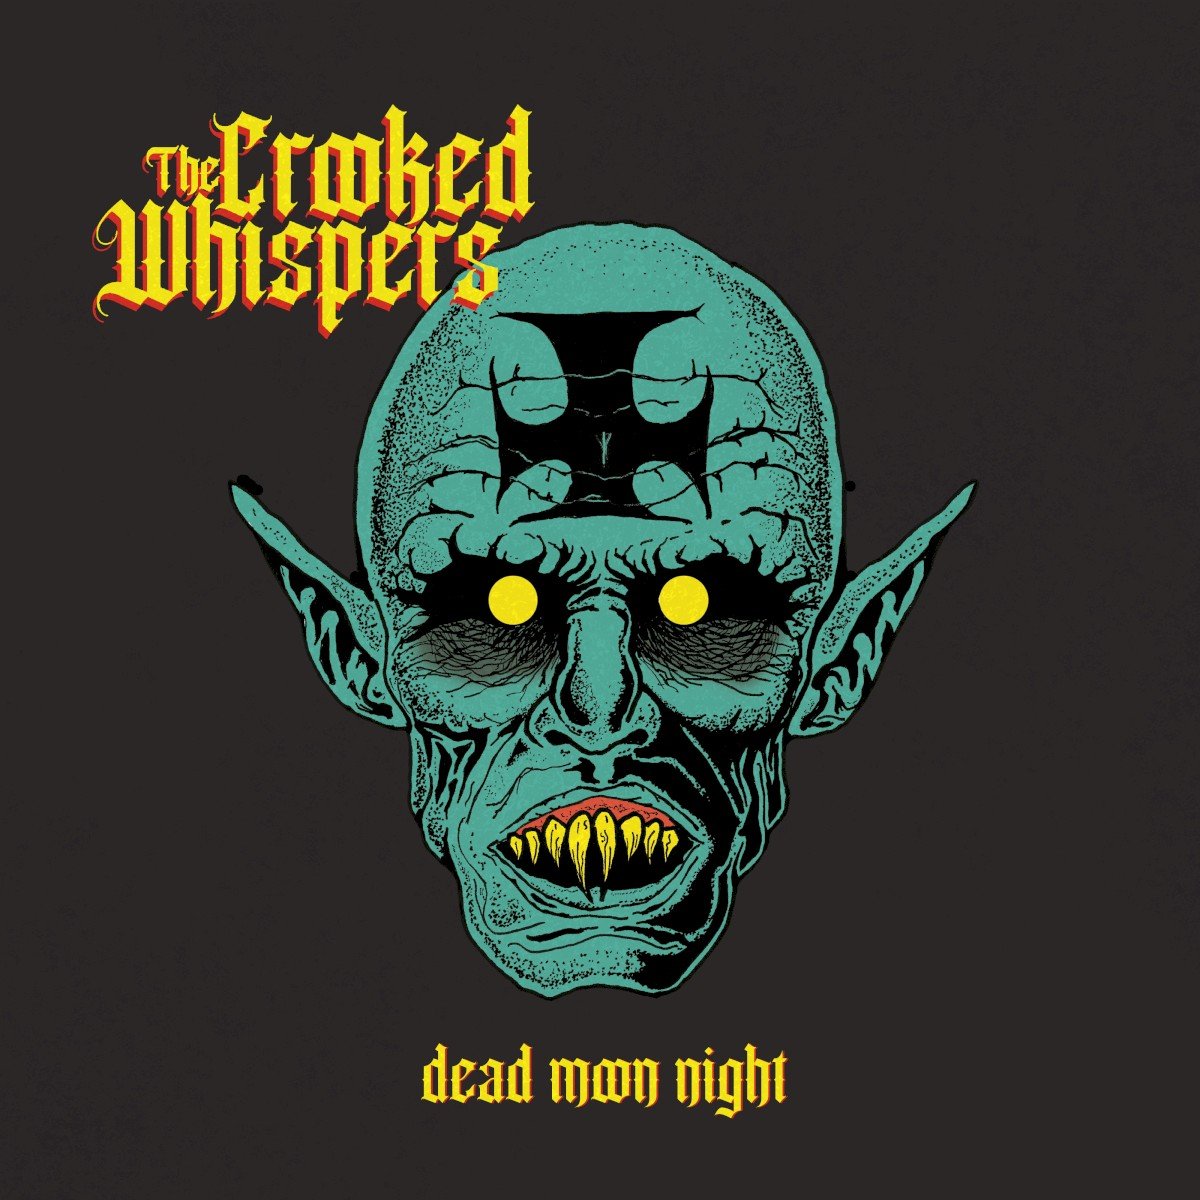 The Crooked Whispers - Dead Moon Night (2021) 24bit FLAC Download